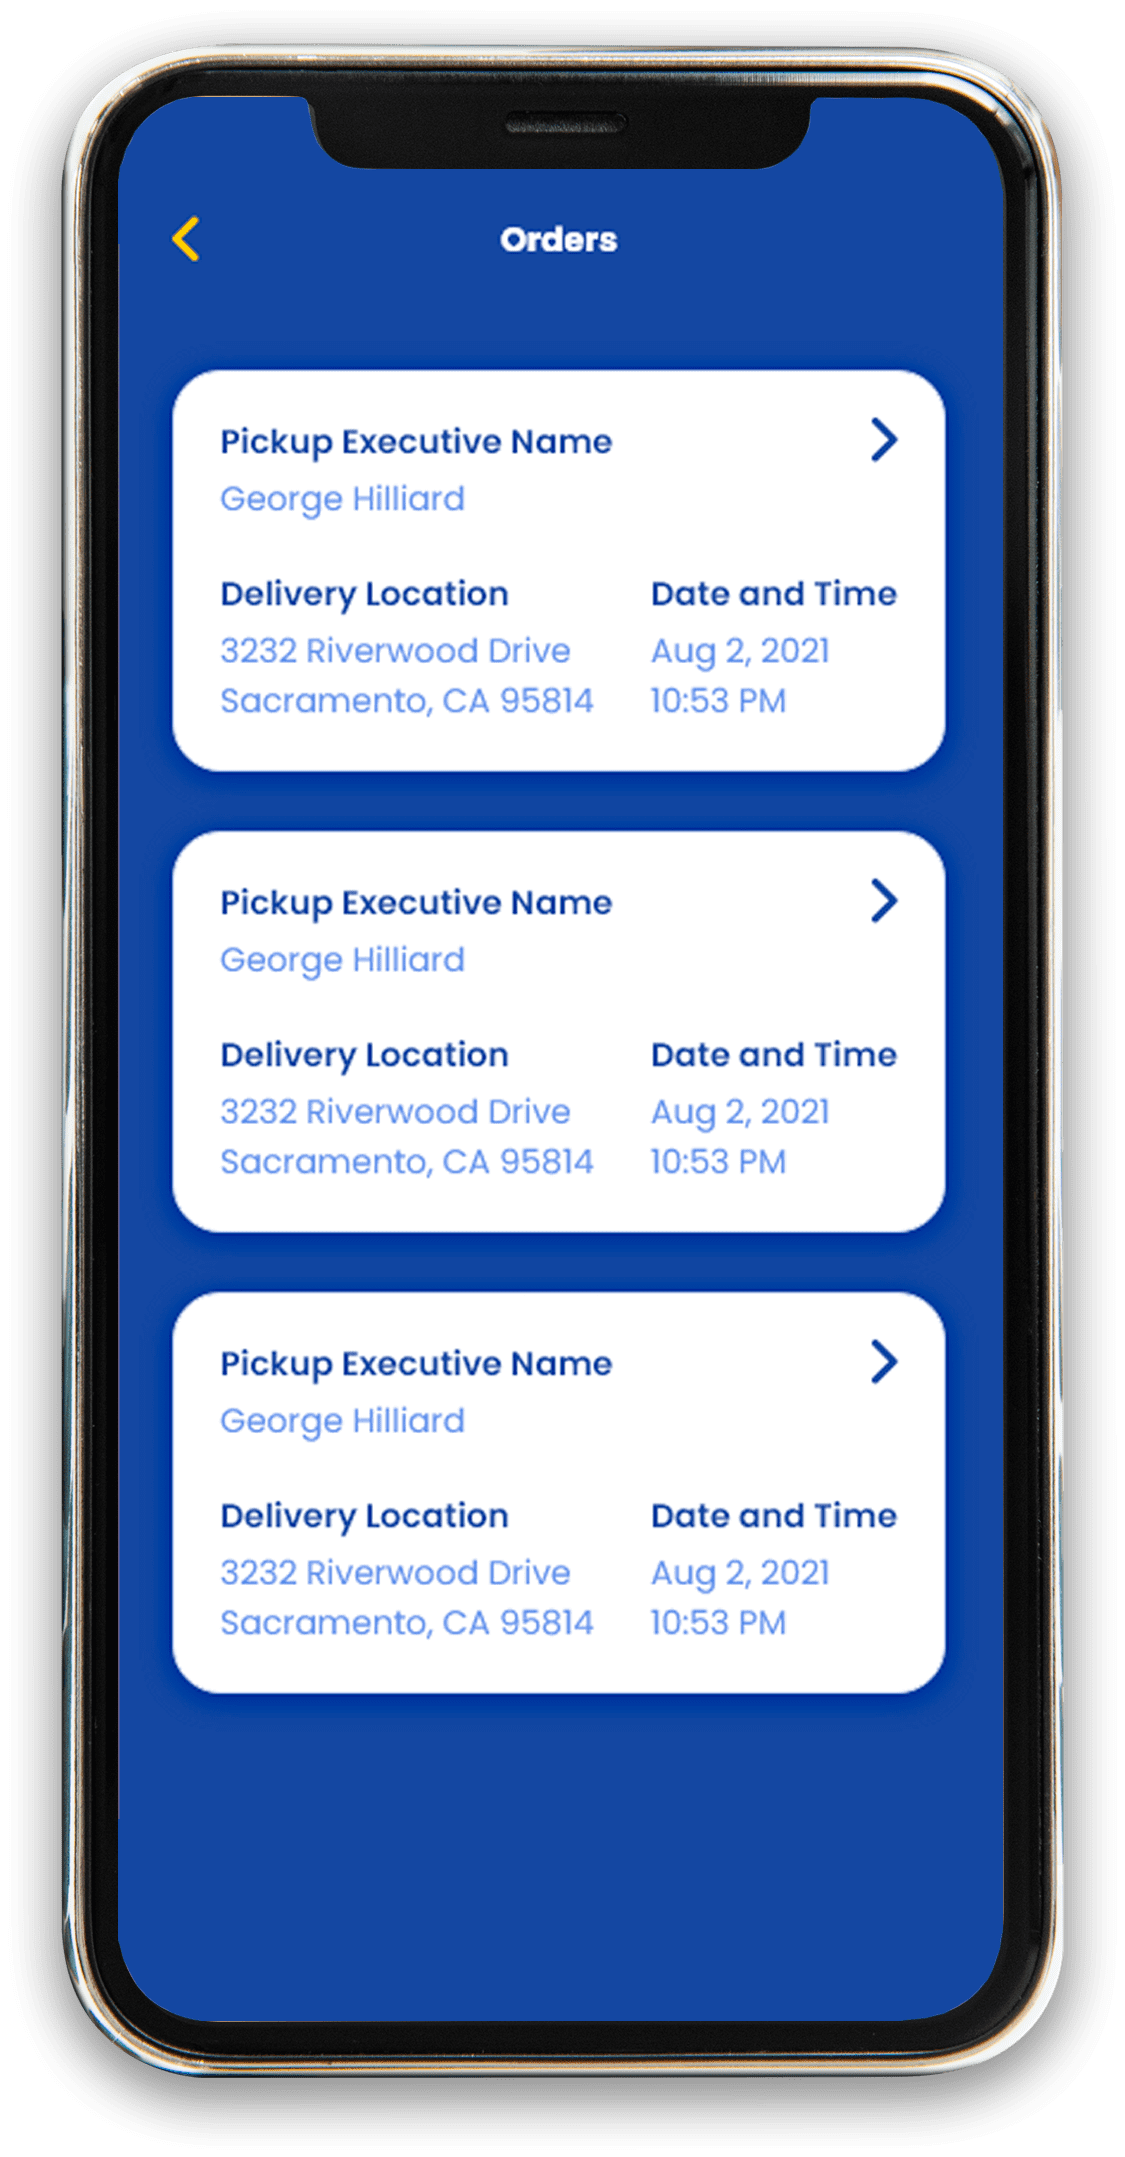 courier-booking-mobile-app-layout